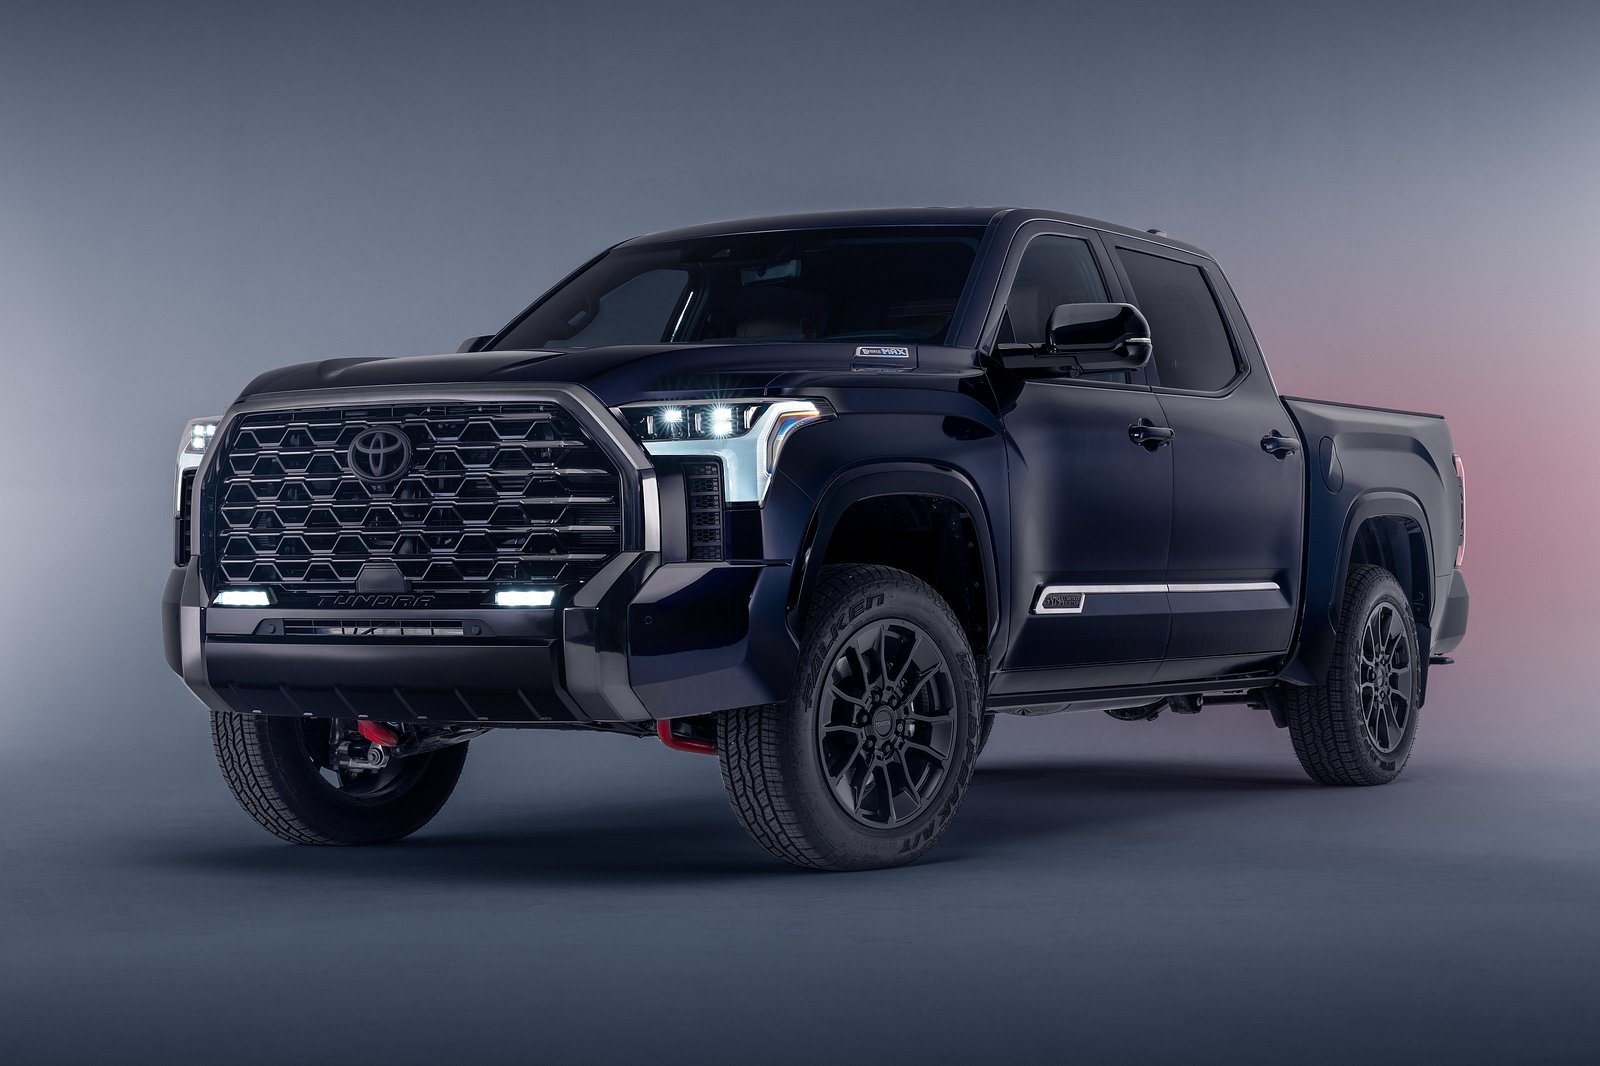 Special Edition Toyota Tundra 1794 Debuts In Texas With Luxurious Tan Leather